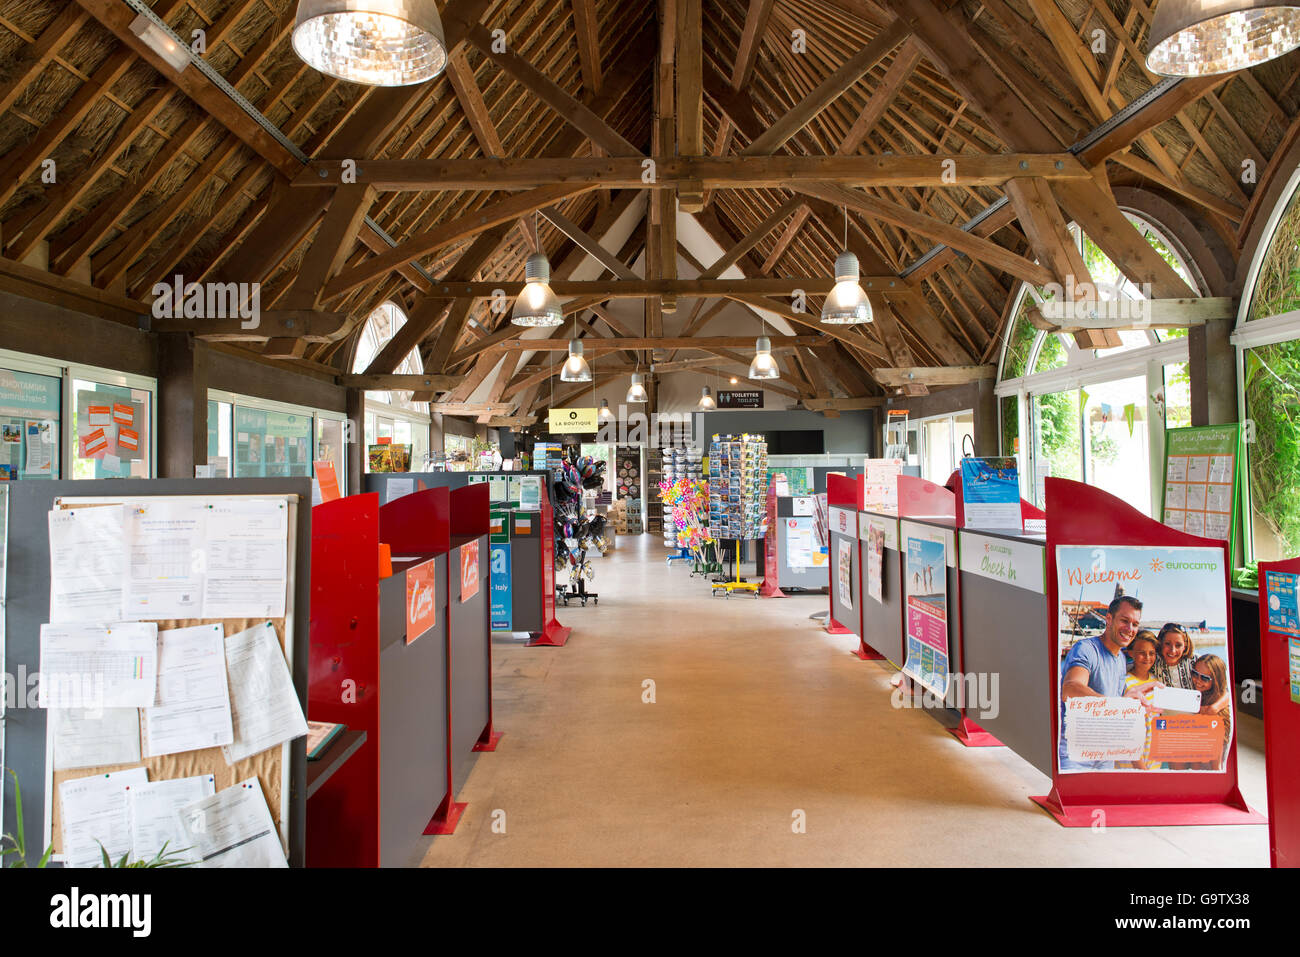 Reception area of Domaine Des Ormes campsite in Brittany, France Stock Photo